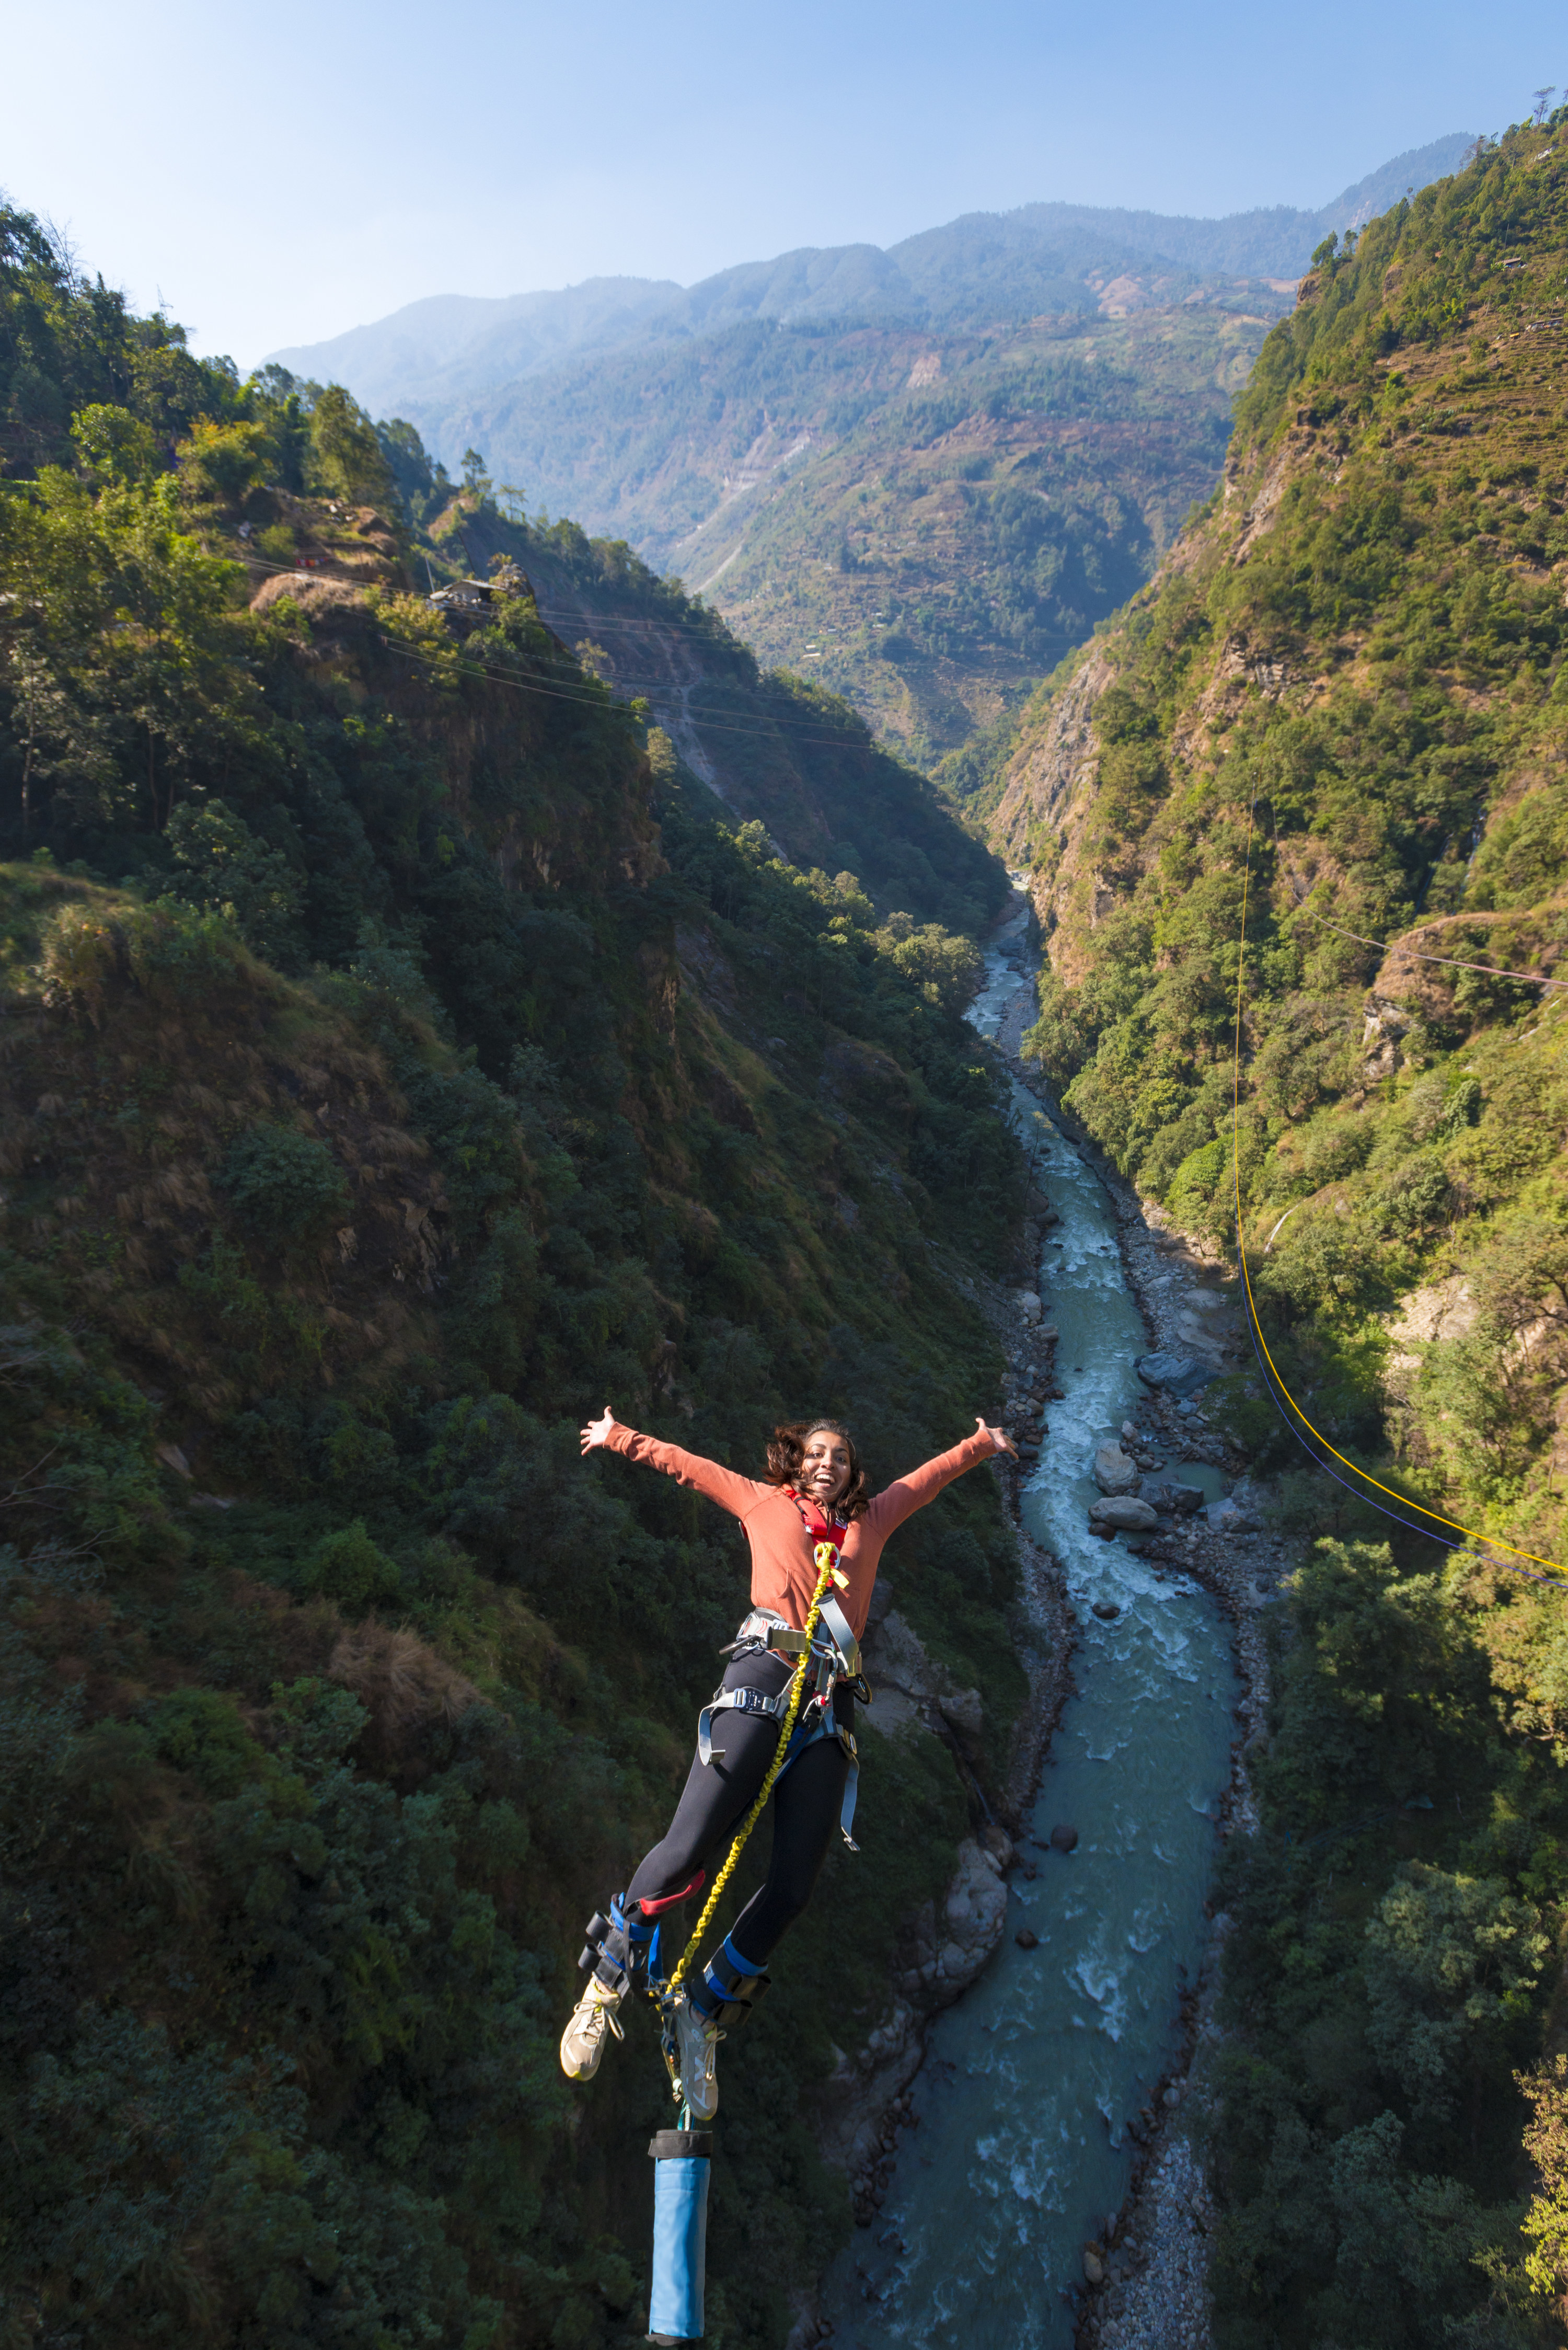 A person bungee jumping